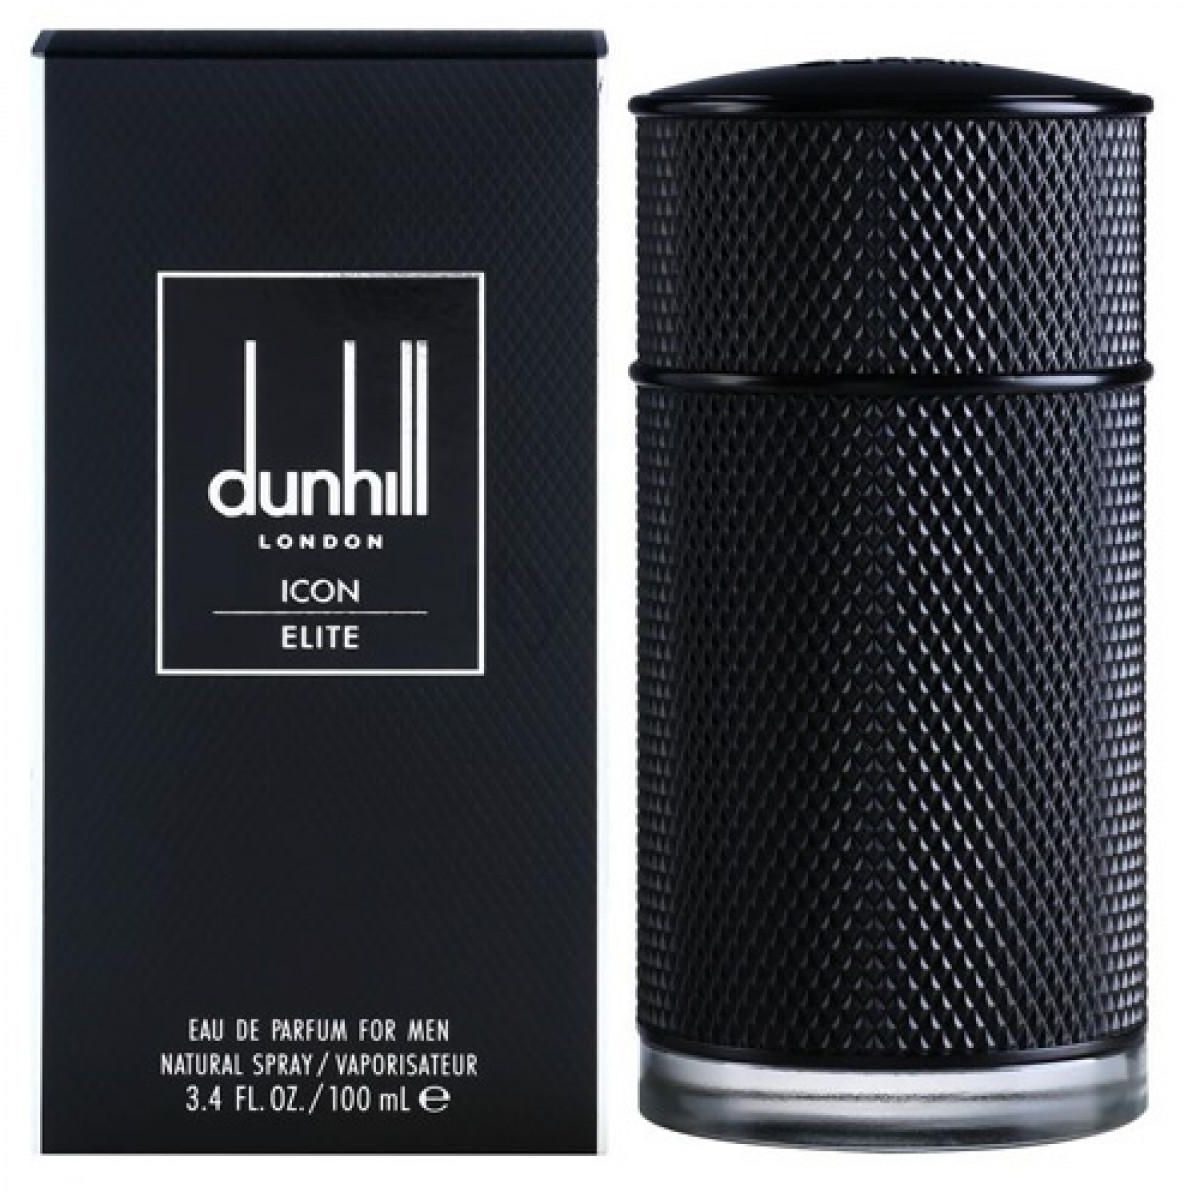 Dunhill London Icon Elite EDP 100ml Perfume For Men price from ...